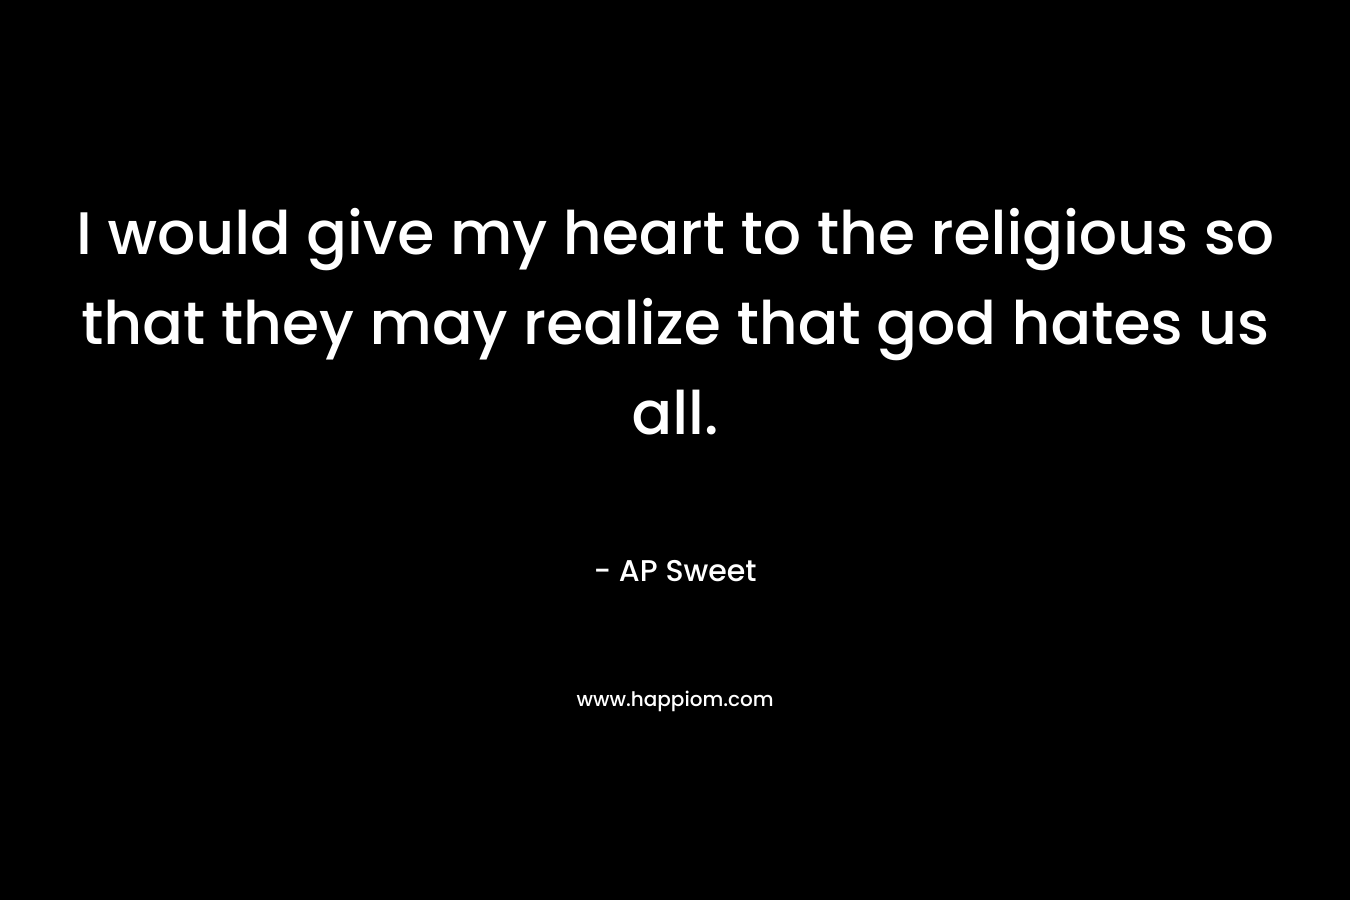 I would give my heart to the religious so that they may realize that god hates us all. – AP Sweet